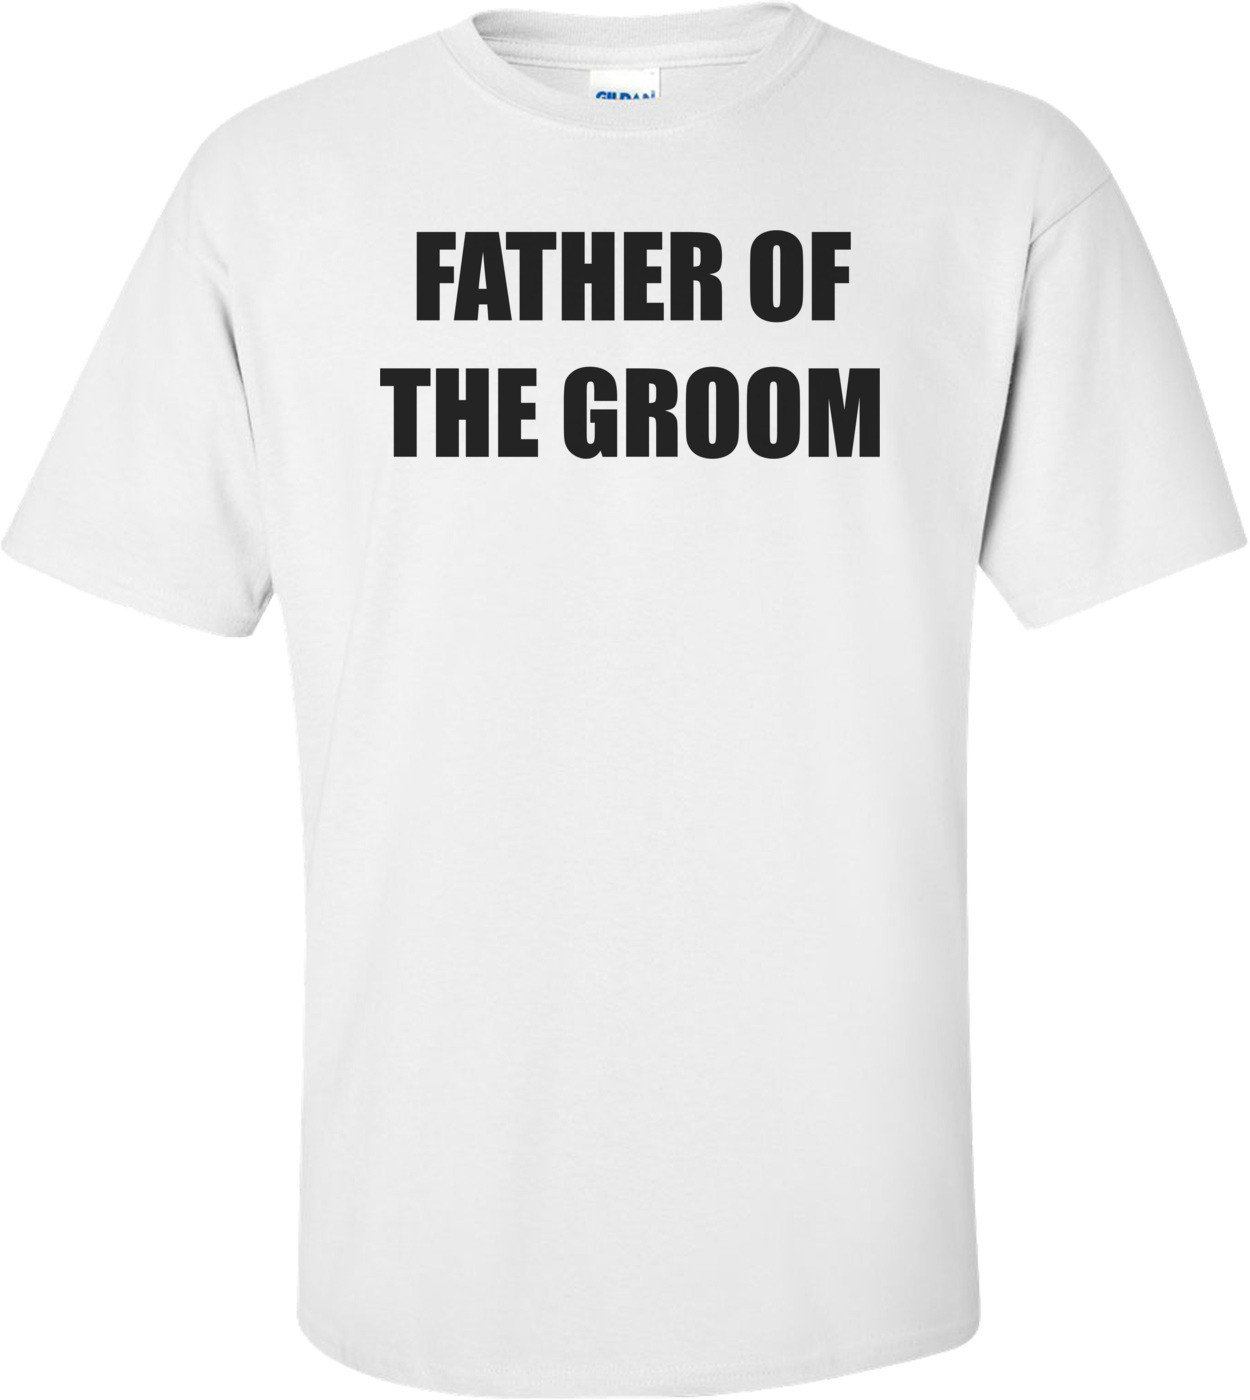 FATHER OF THE GROOM Shirt